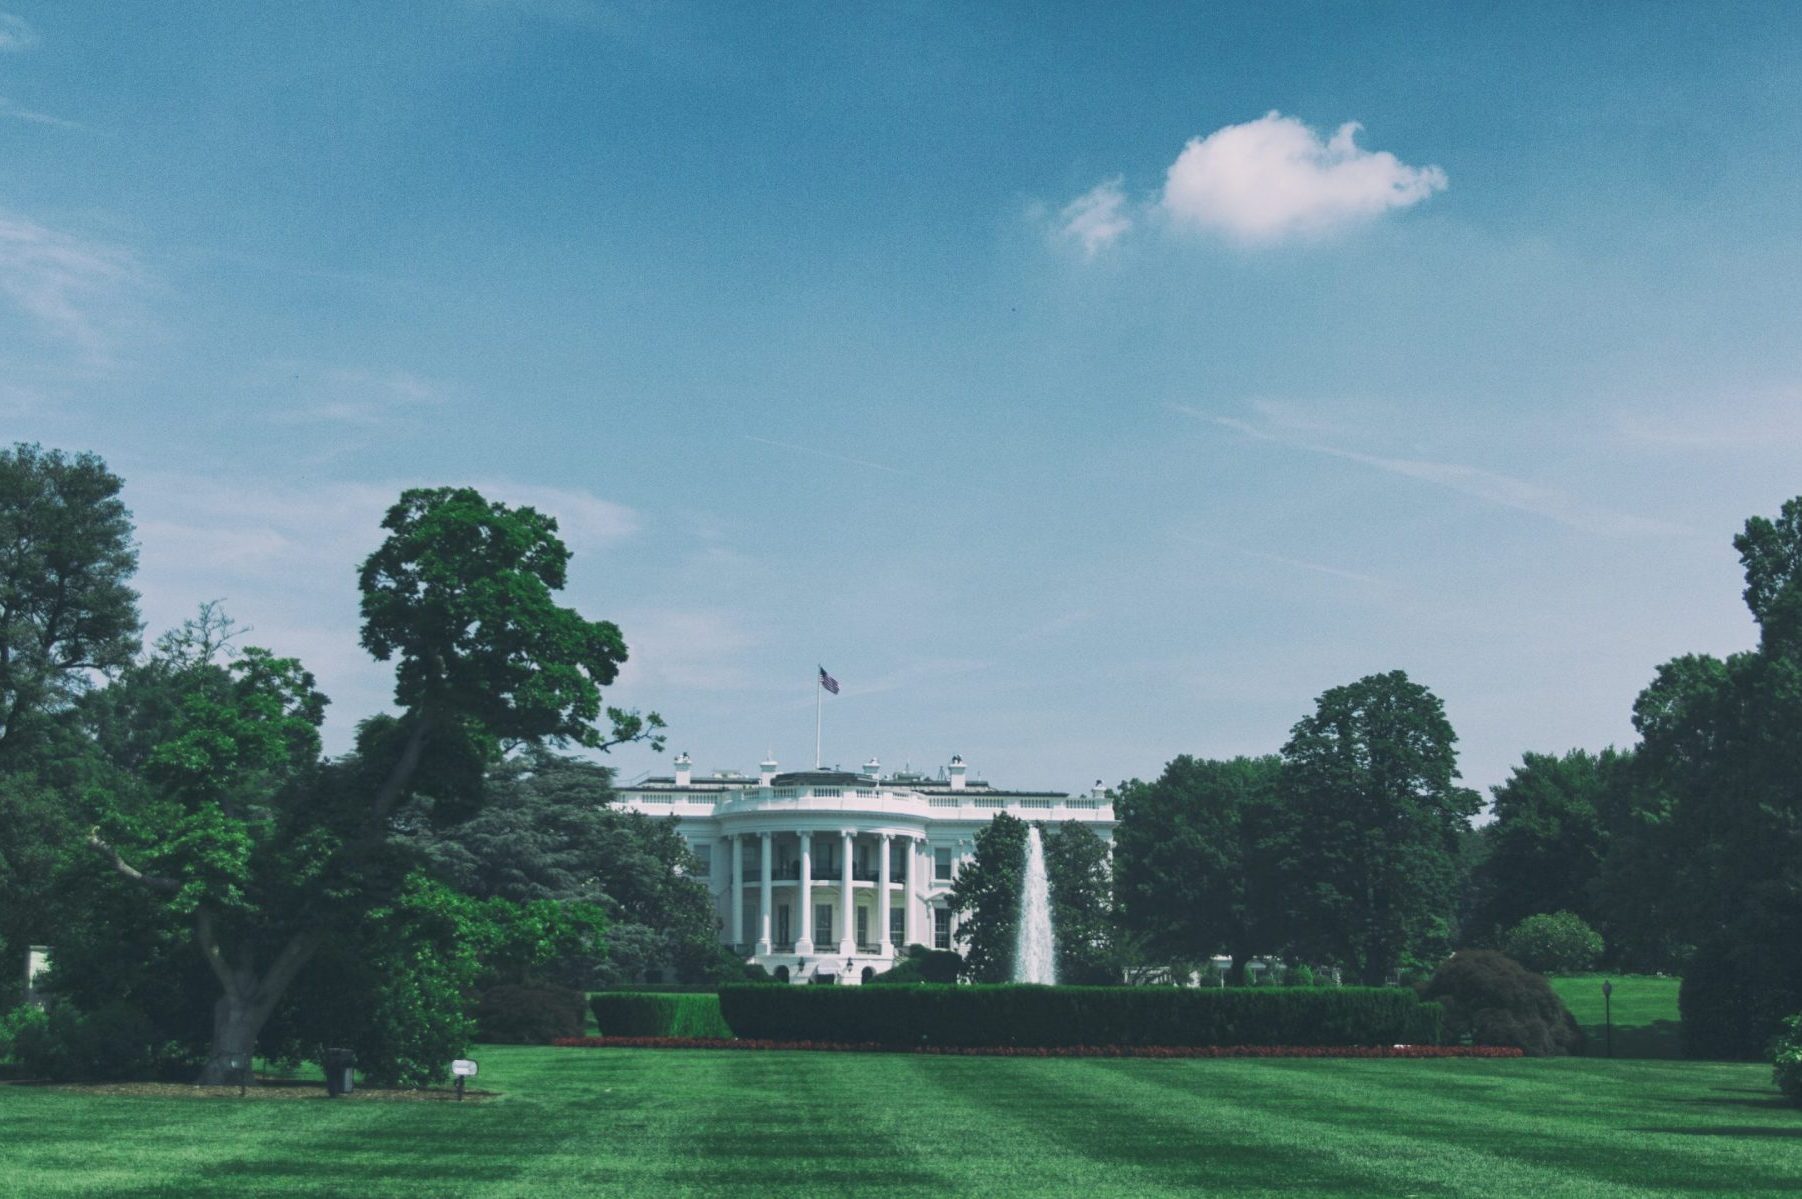 In article about book West Wingers, a photo of the White House